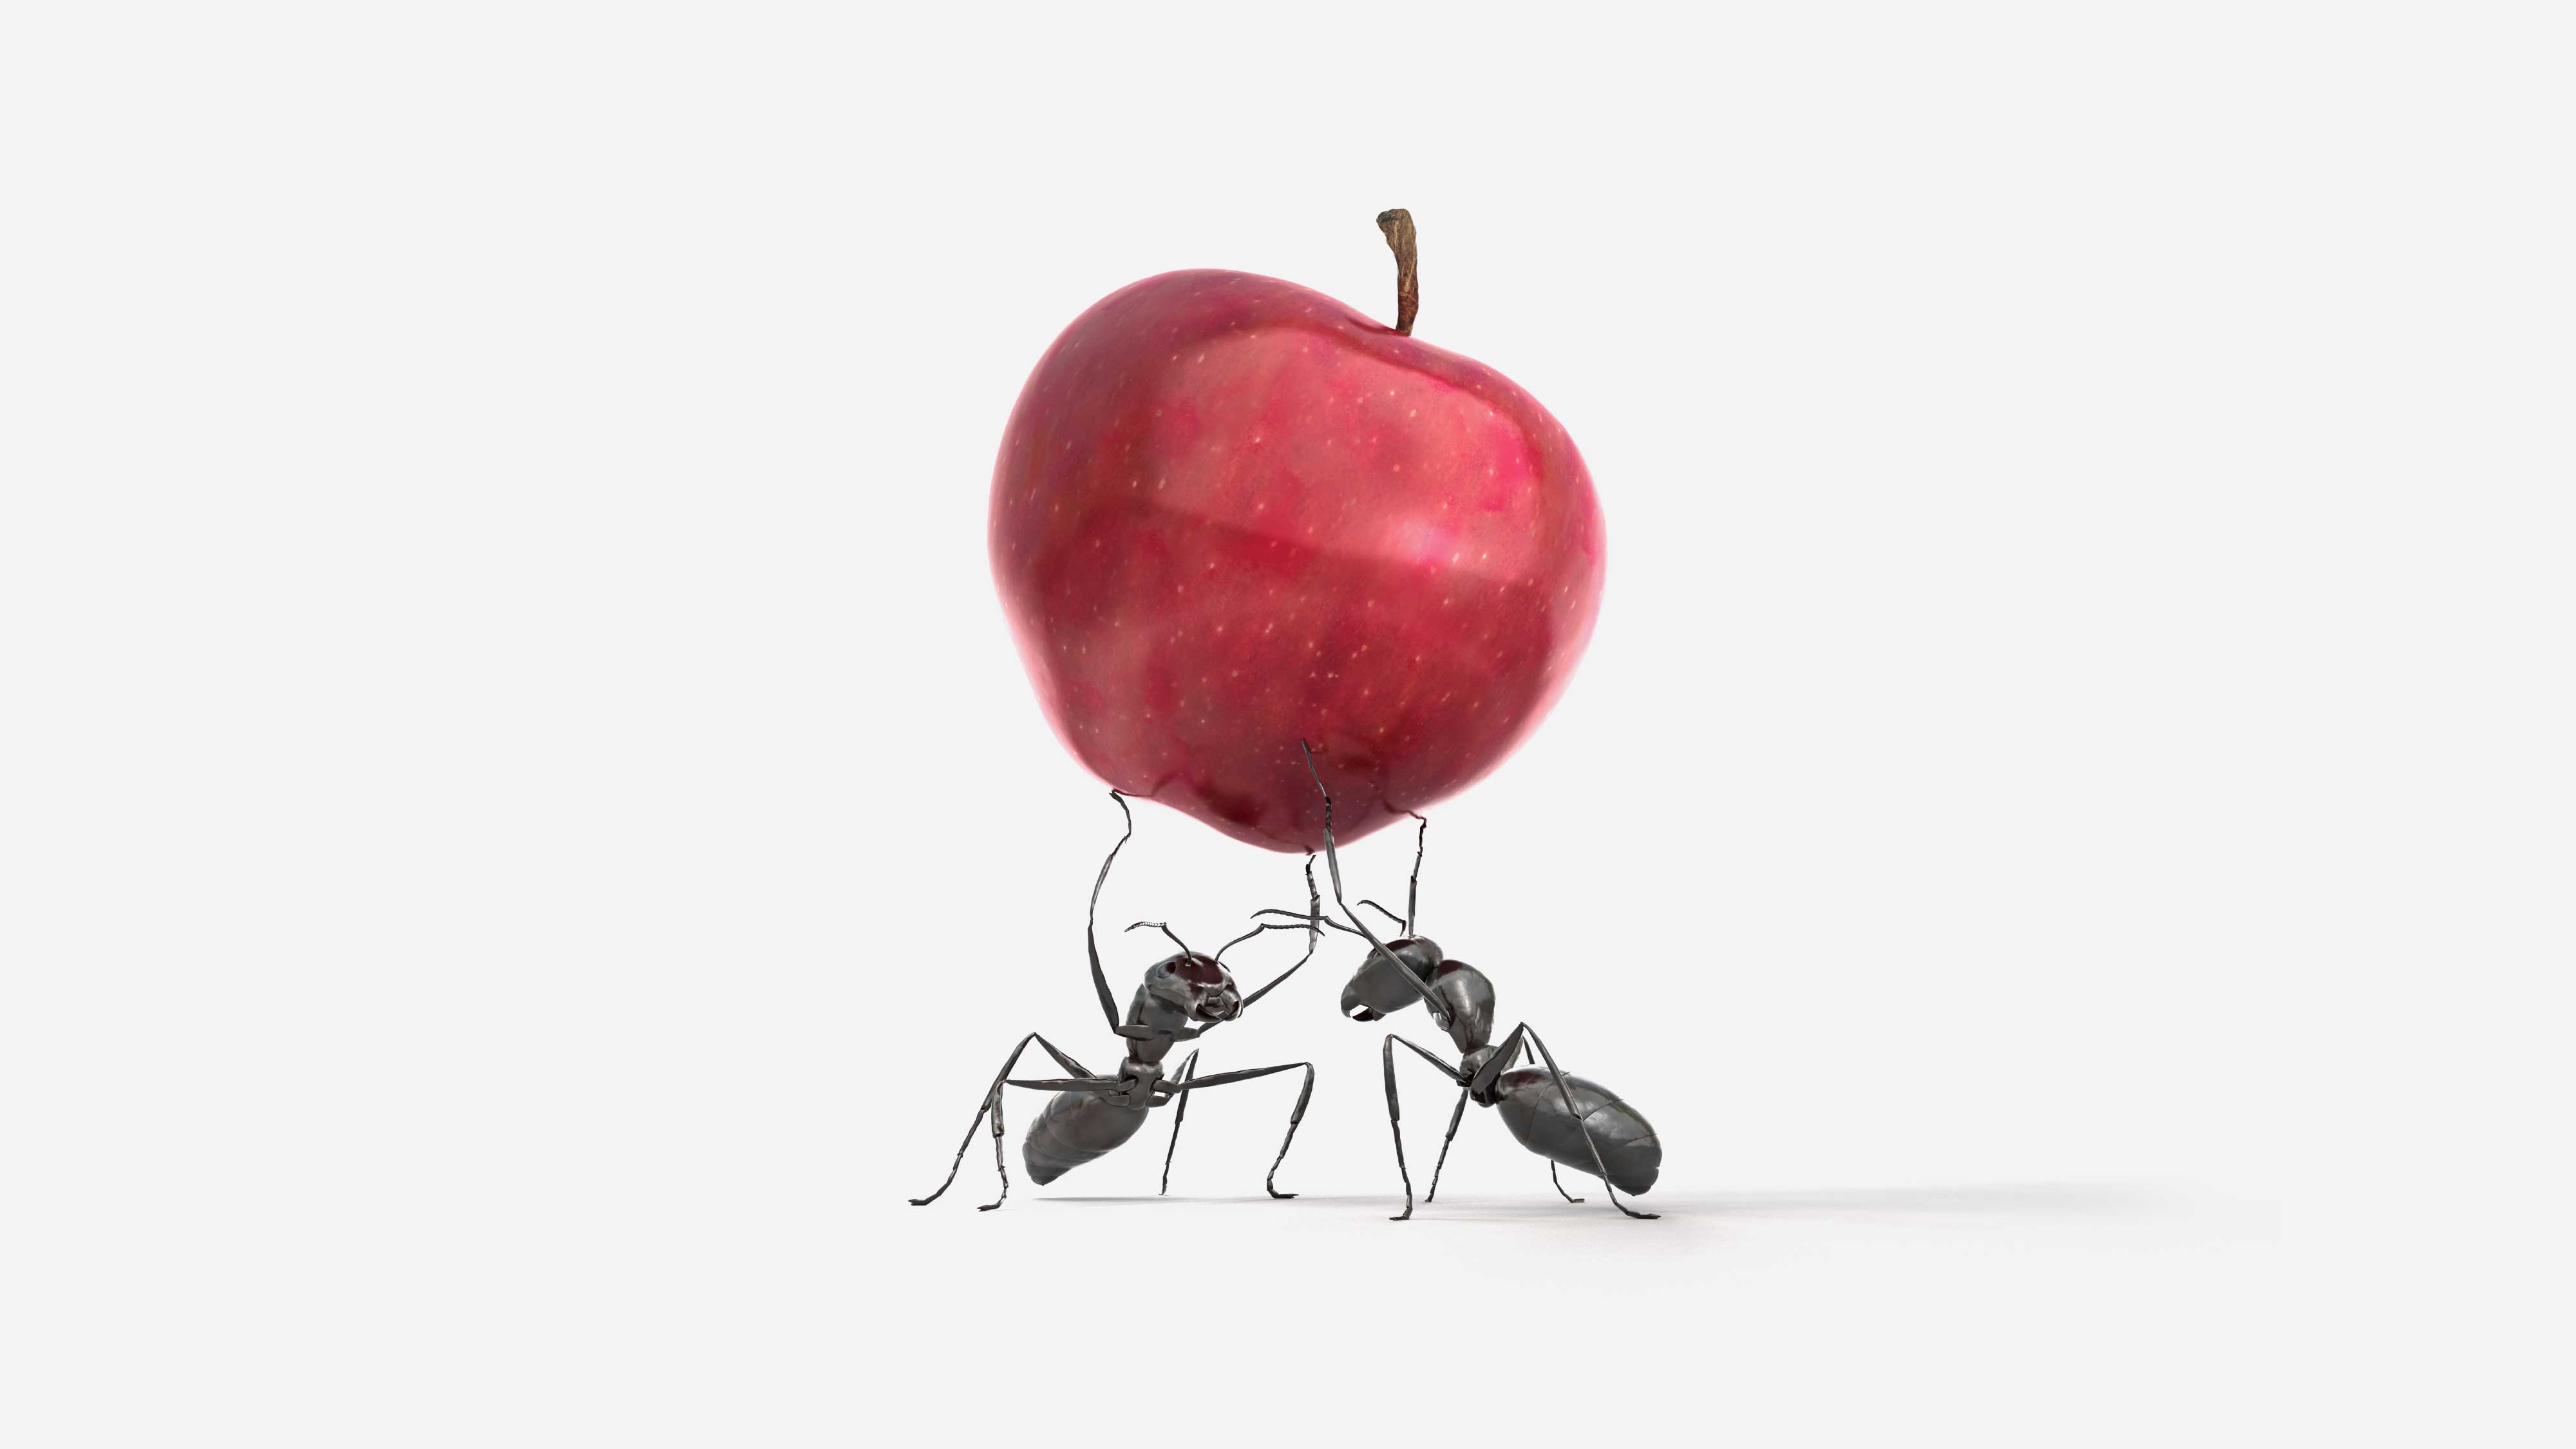 Ants holding up an apple